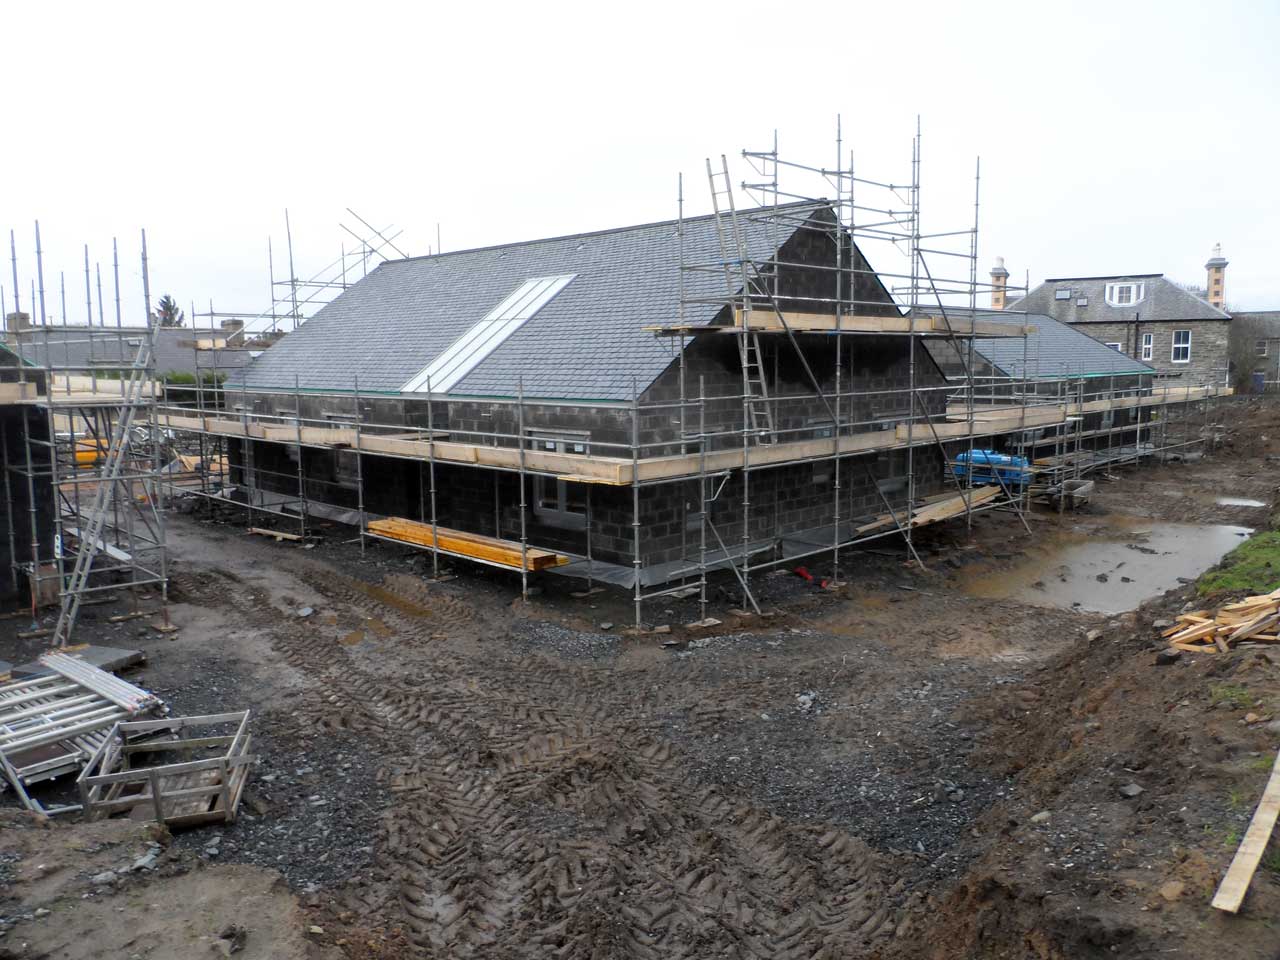 Photo: New Children's Home In Wick 1 January 2014